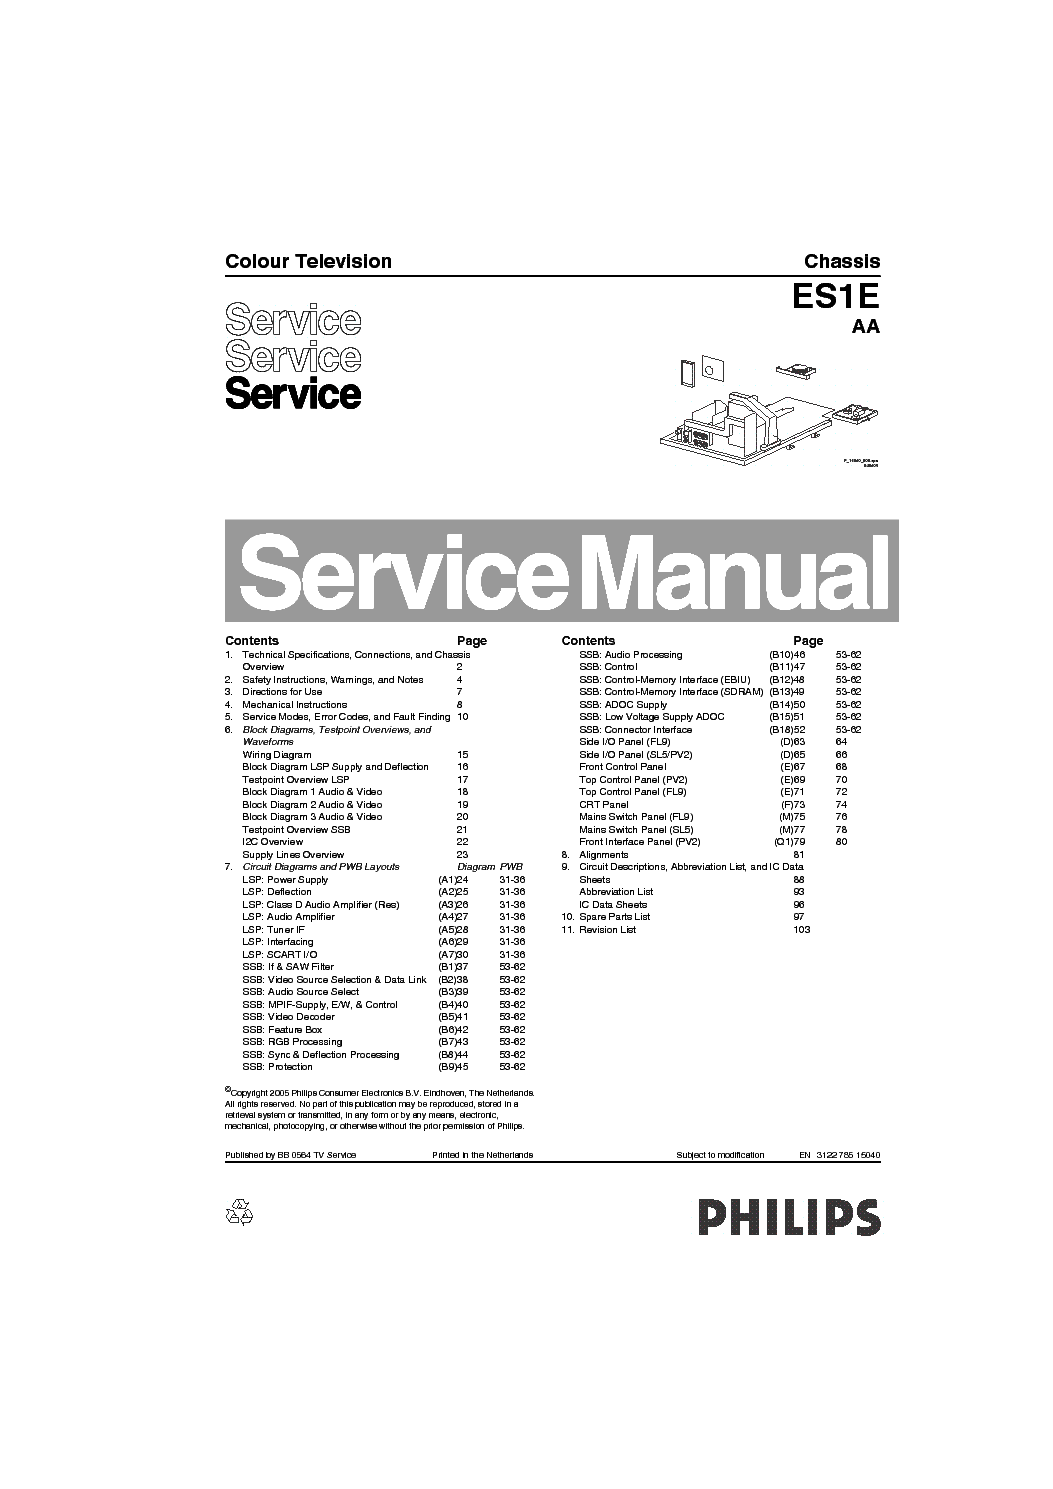 PHILIPS CHASSIS ES1E AA SM service manual (1st page)